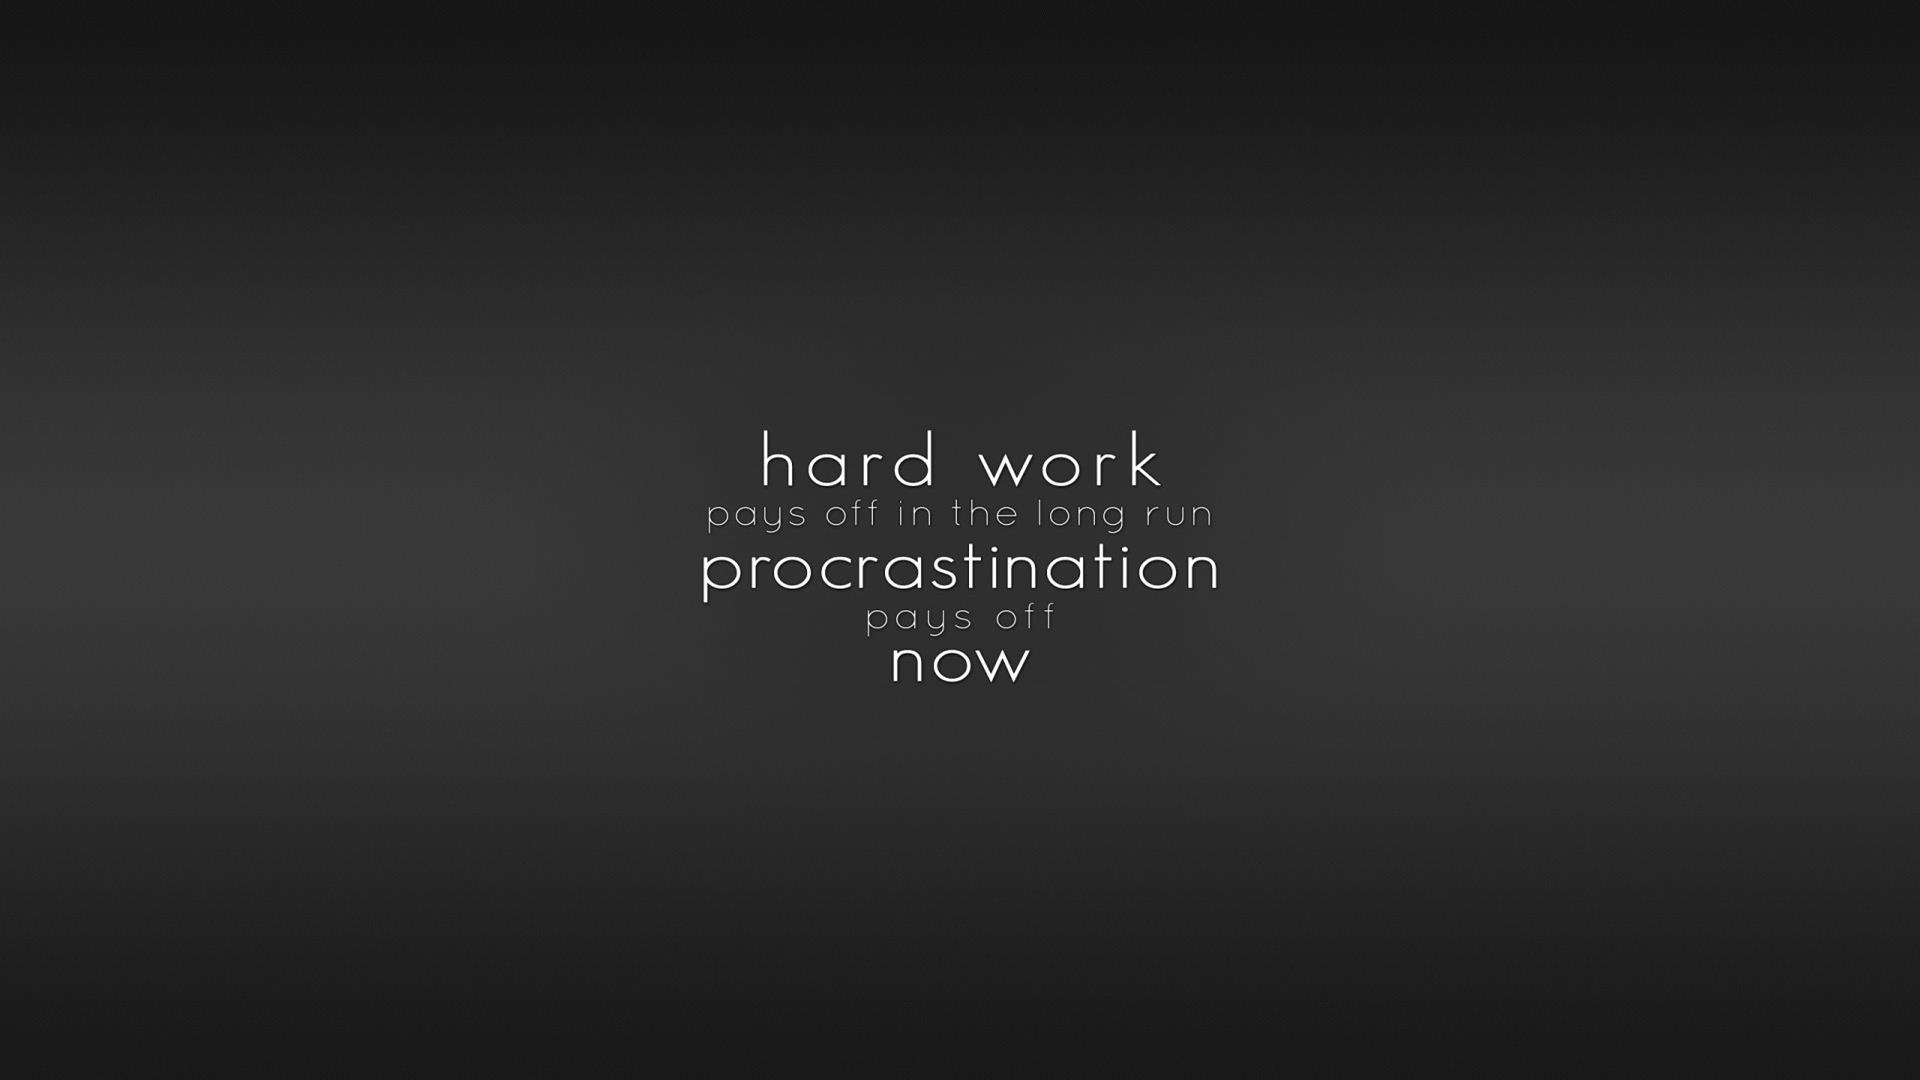 Hard work pays off in the long run Free hd wallpapers for